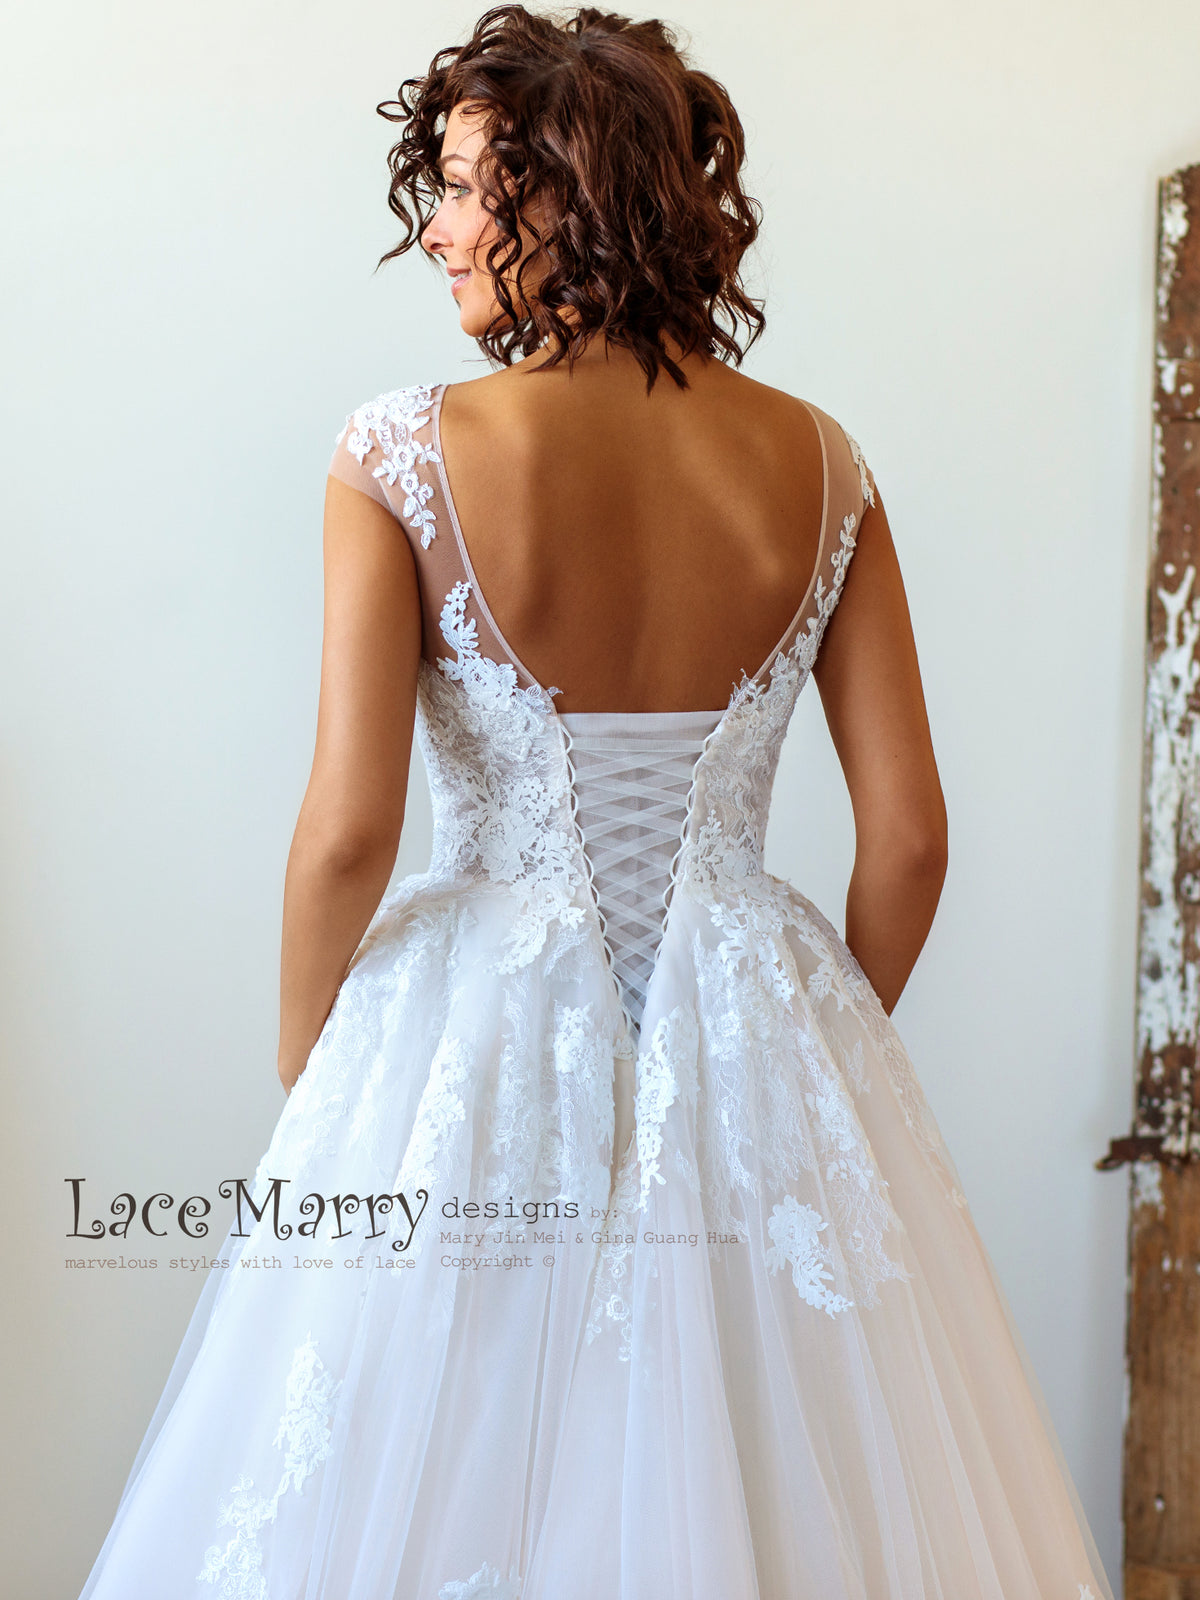 Corset Back Wedding Dress with Cap Sleeves